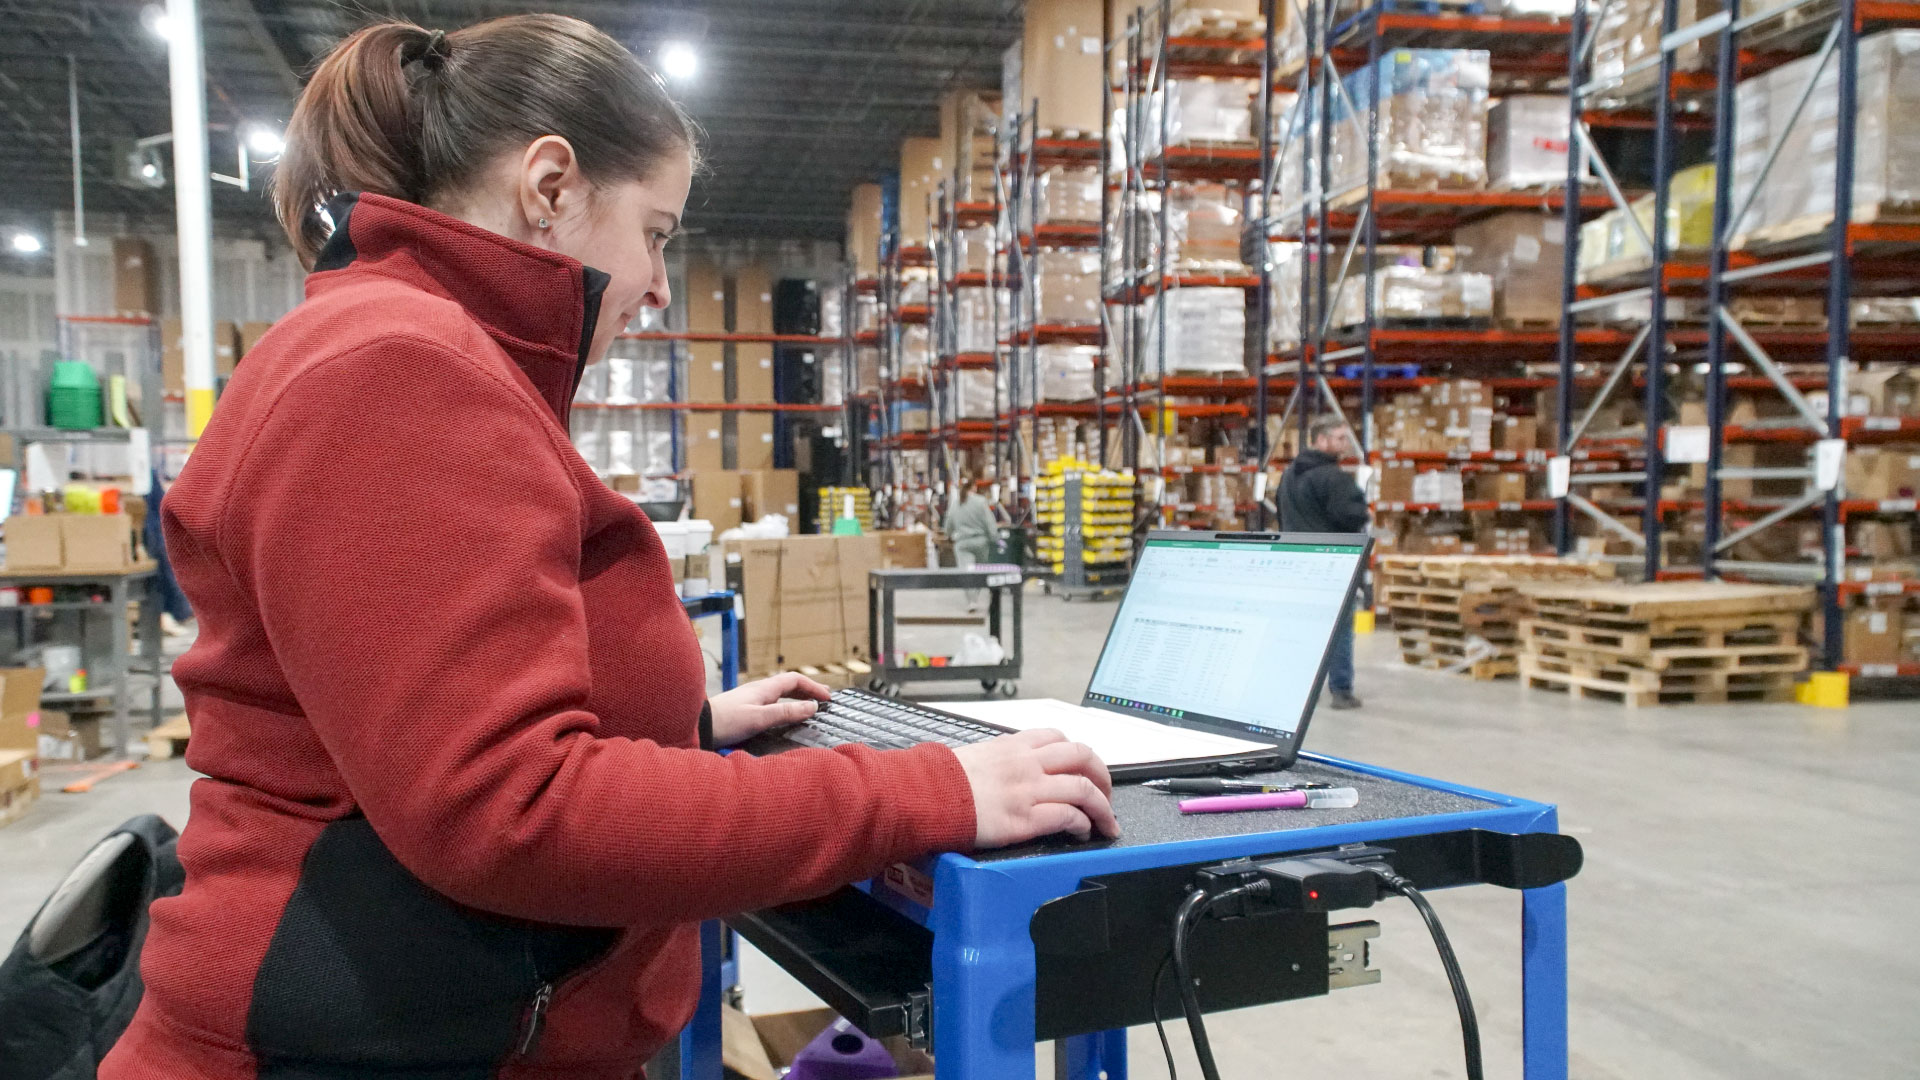 Bailiwick employee reviewing inventory in a warehouse.